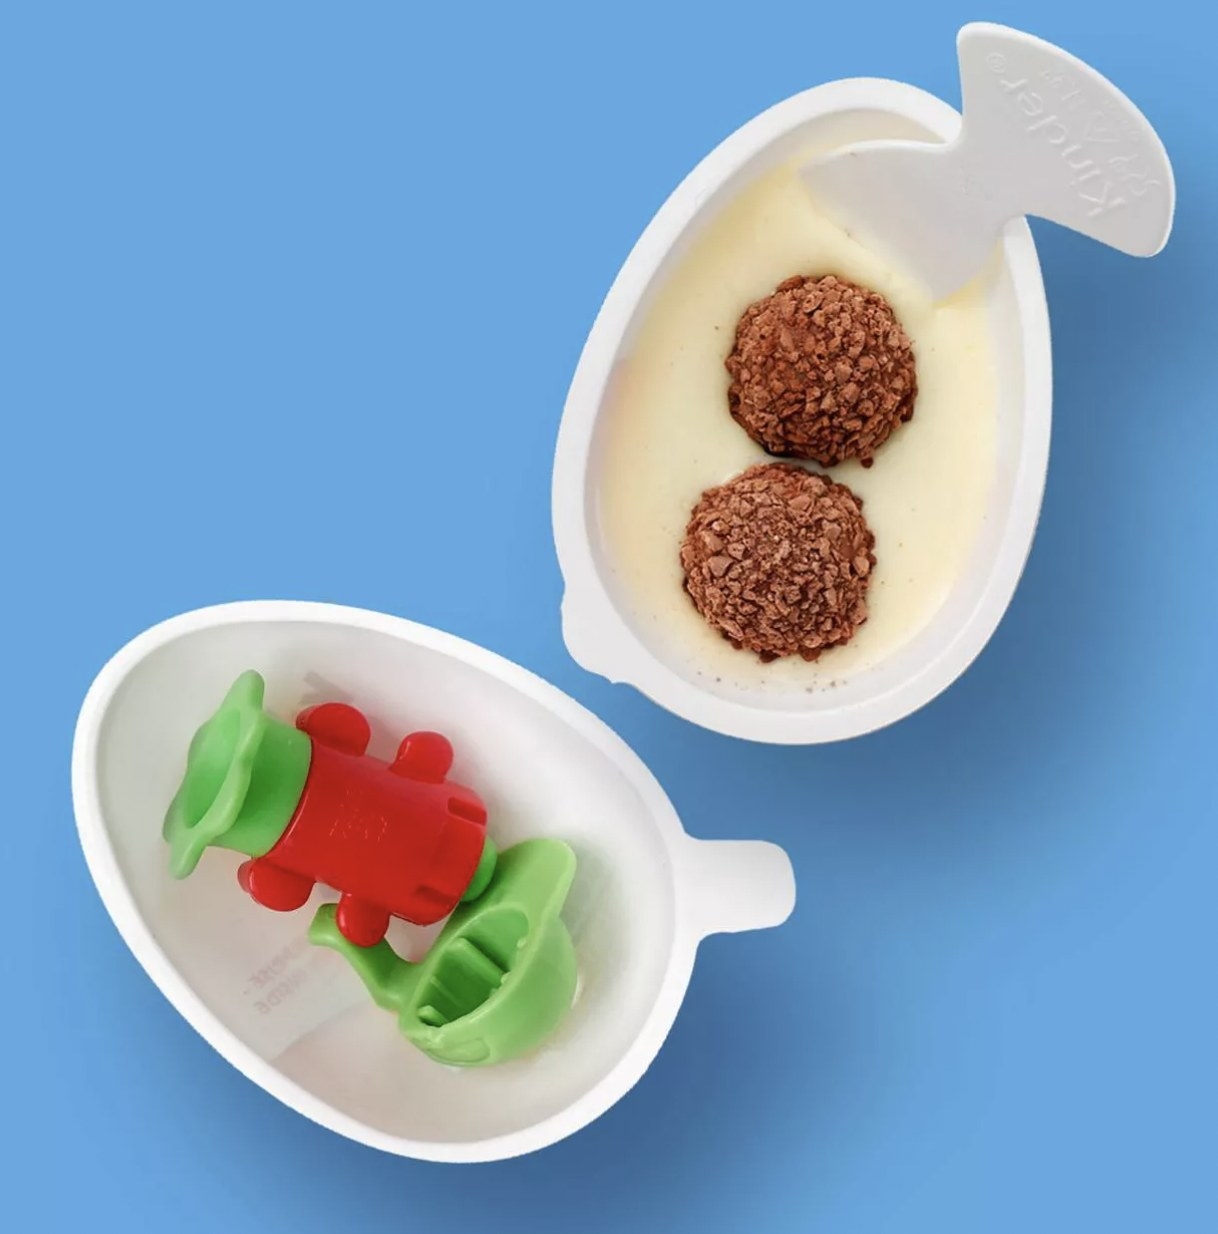 A Kinder Joy egg open to reveal a small toy in one half and creme with chocolate in the other